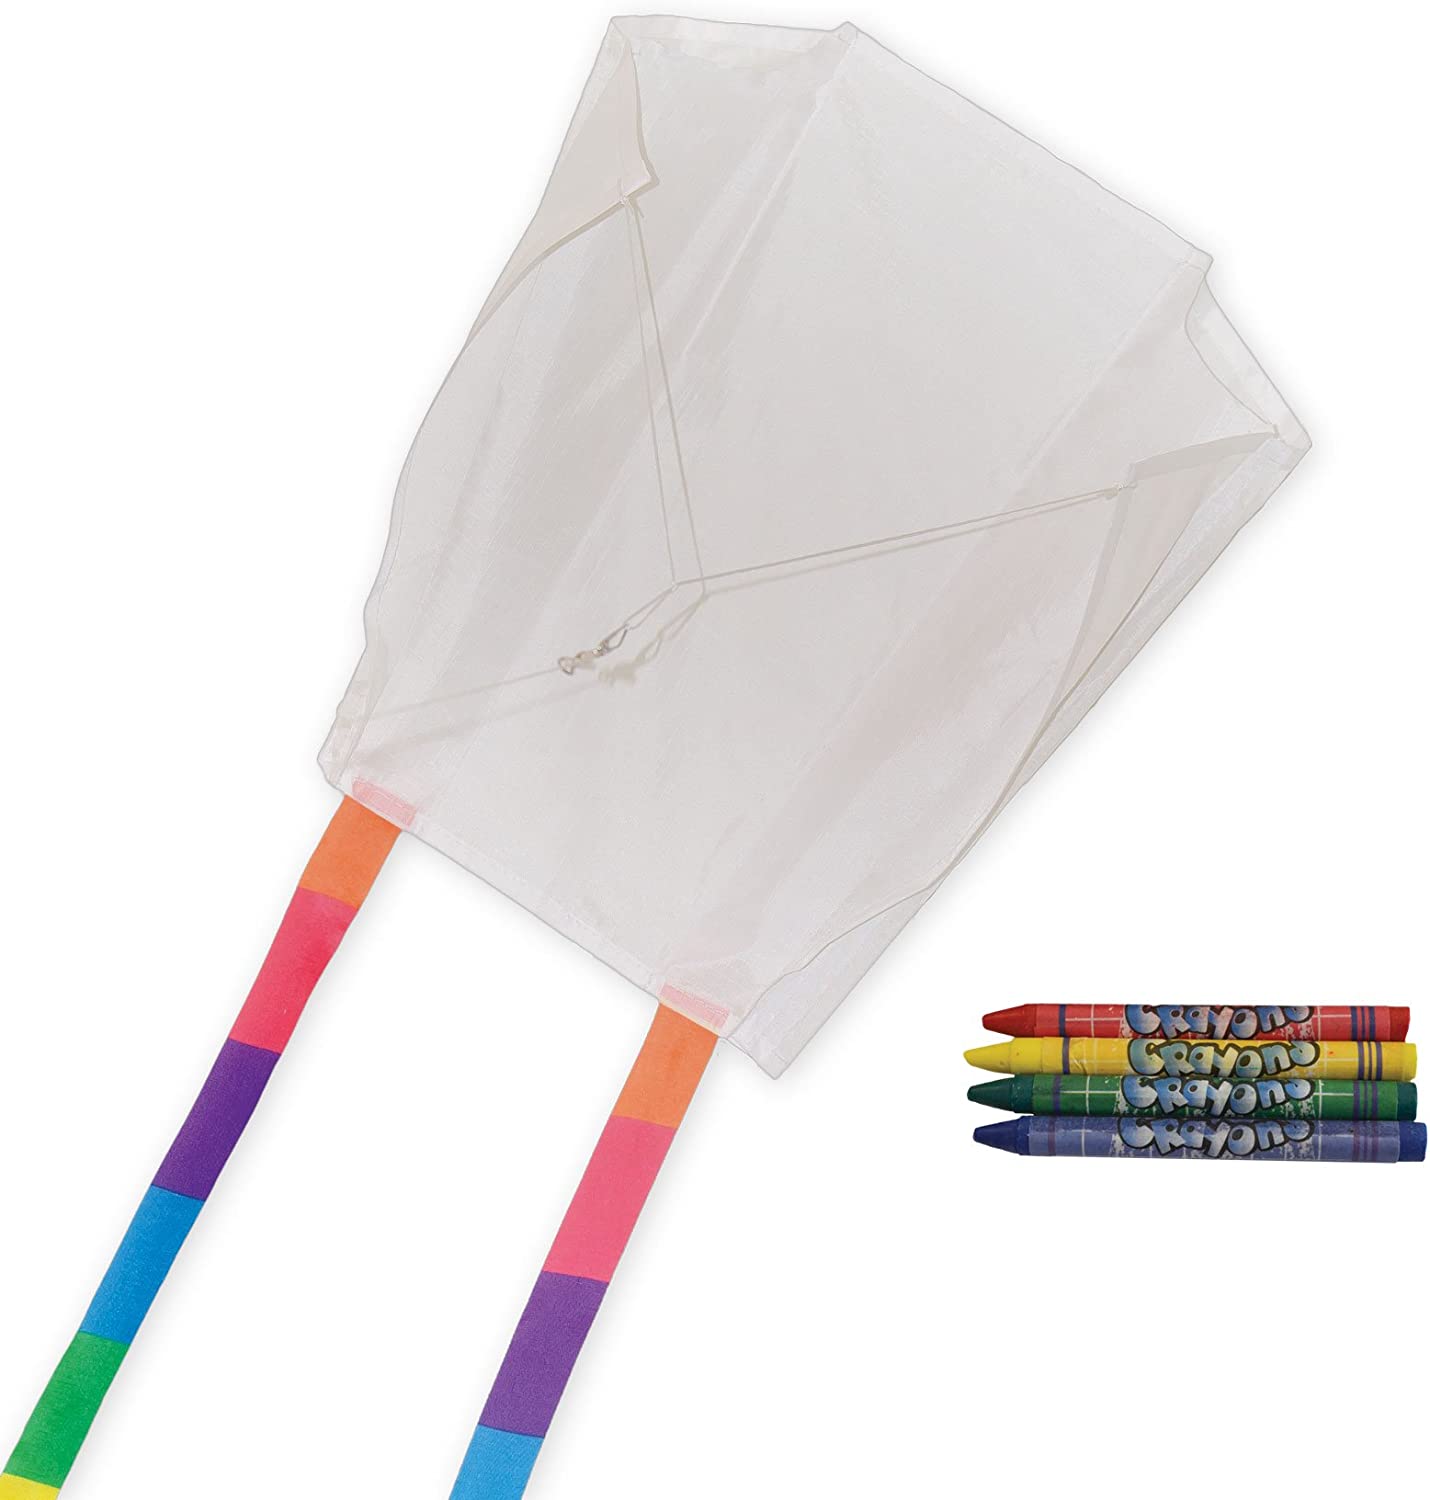 In the Breeze Coloring Sled 18 Inch Kite - 50 Piece Party Pack -Single Line Kite-Includes Crayons, Kite Line and Bag-Creative Fun for Kids and Adults